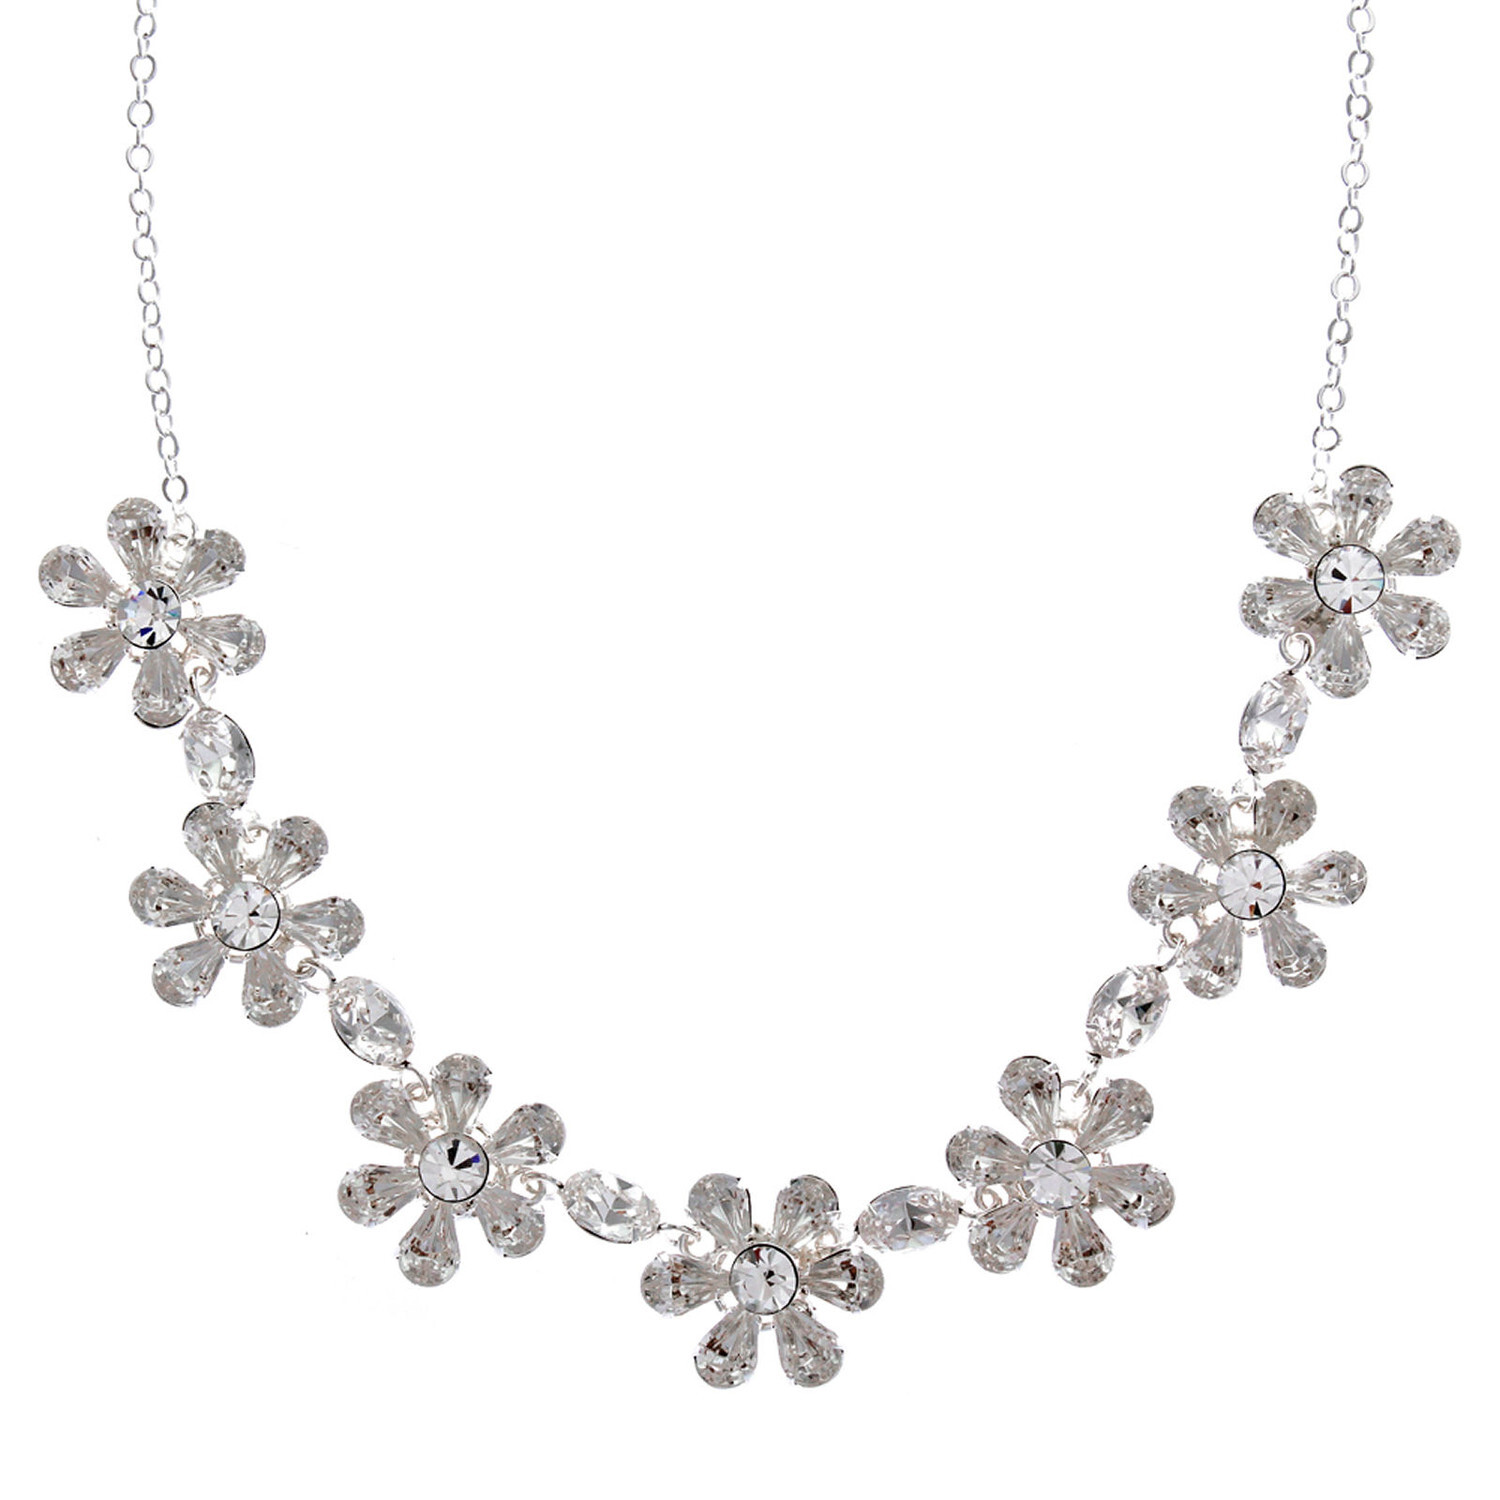 Daisy Chain Necklace Wedding Dress from Totally Cherished - hitched.co.uk